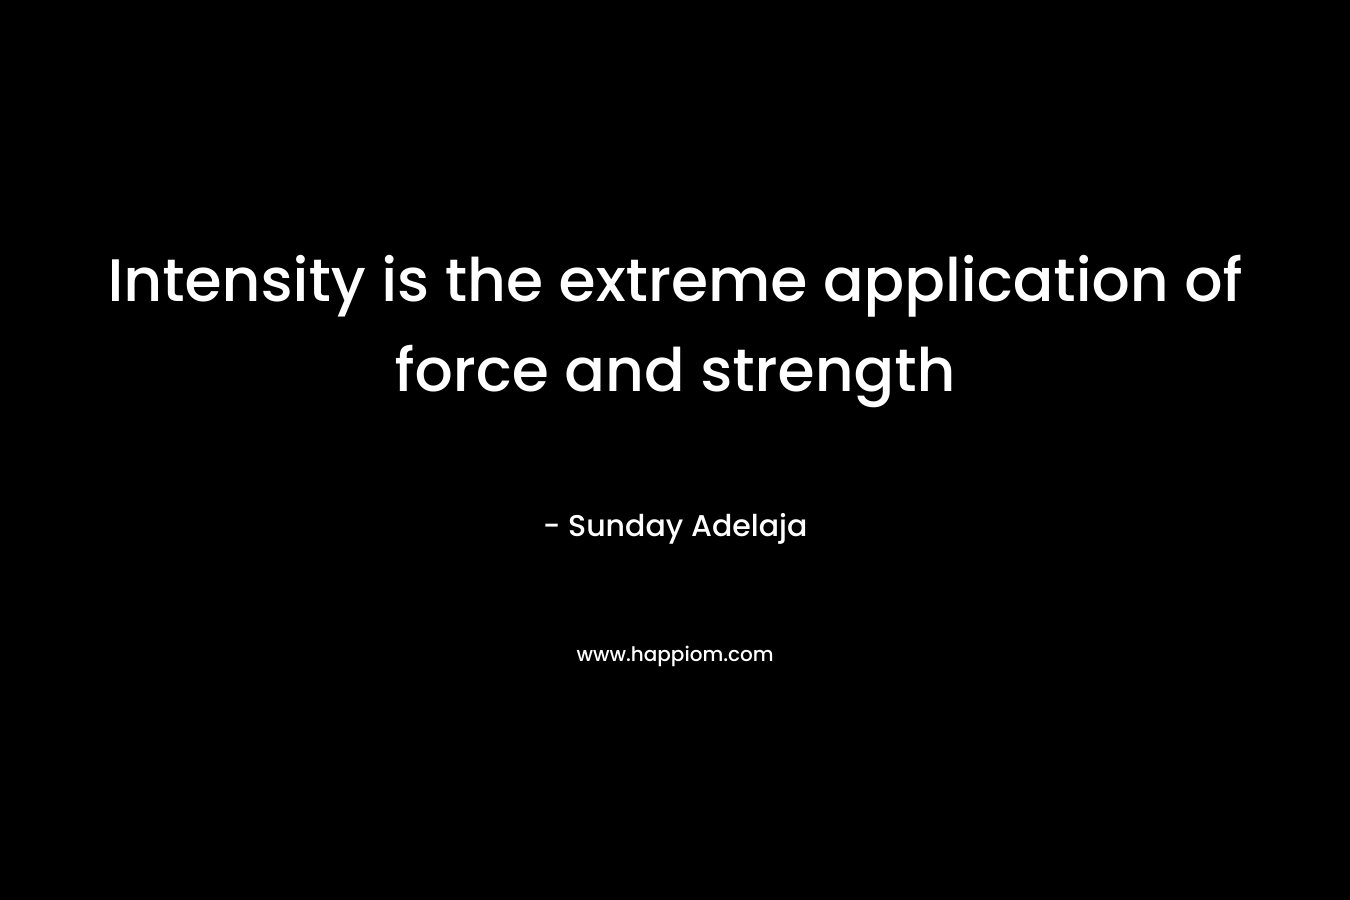 Intensity is the extreme application of force and strength